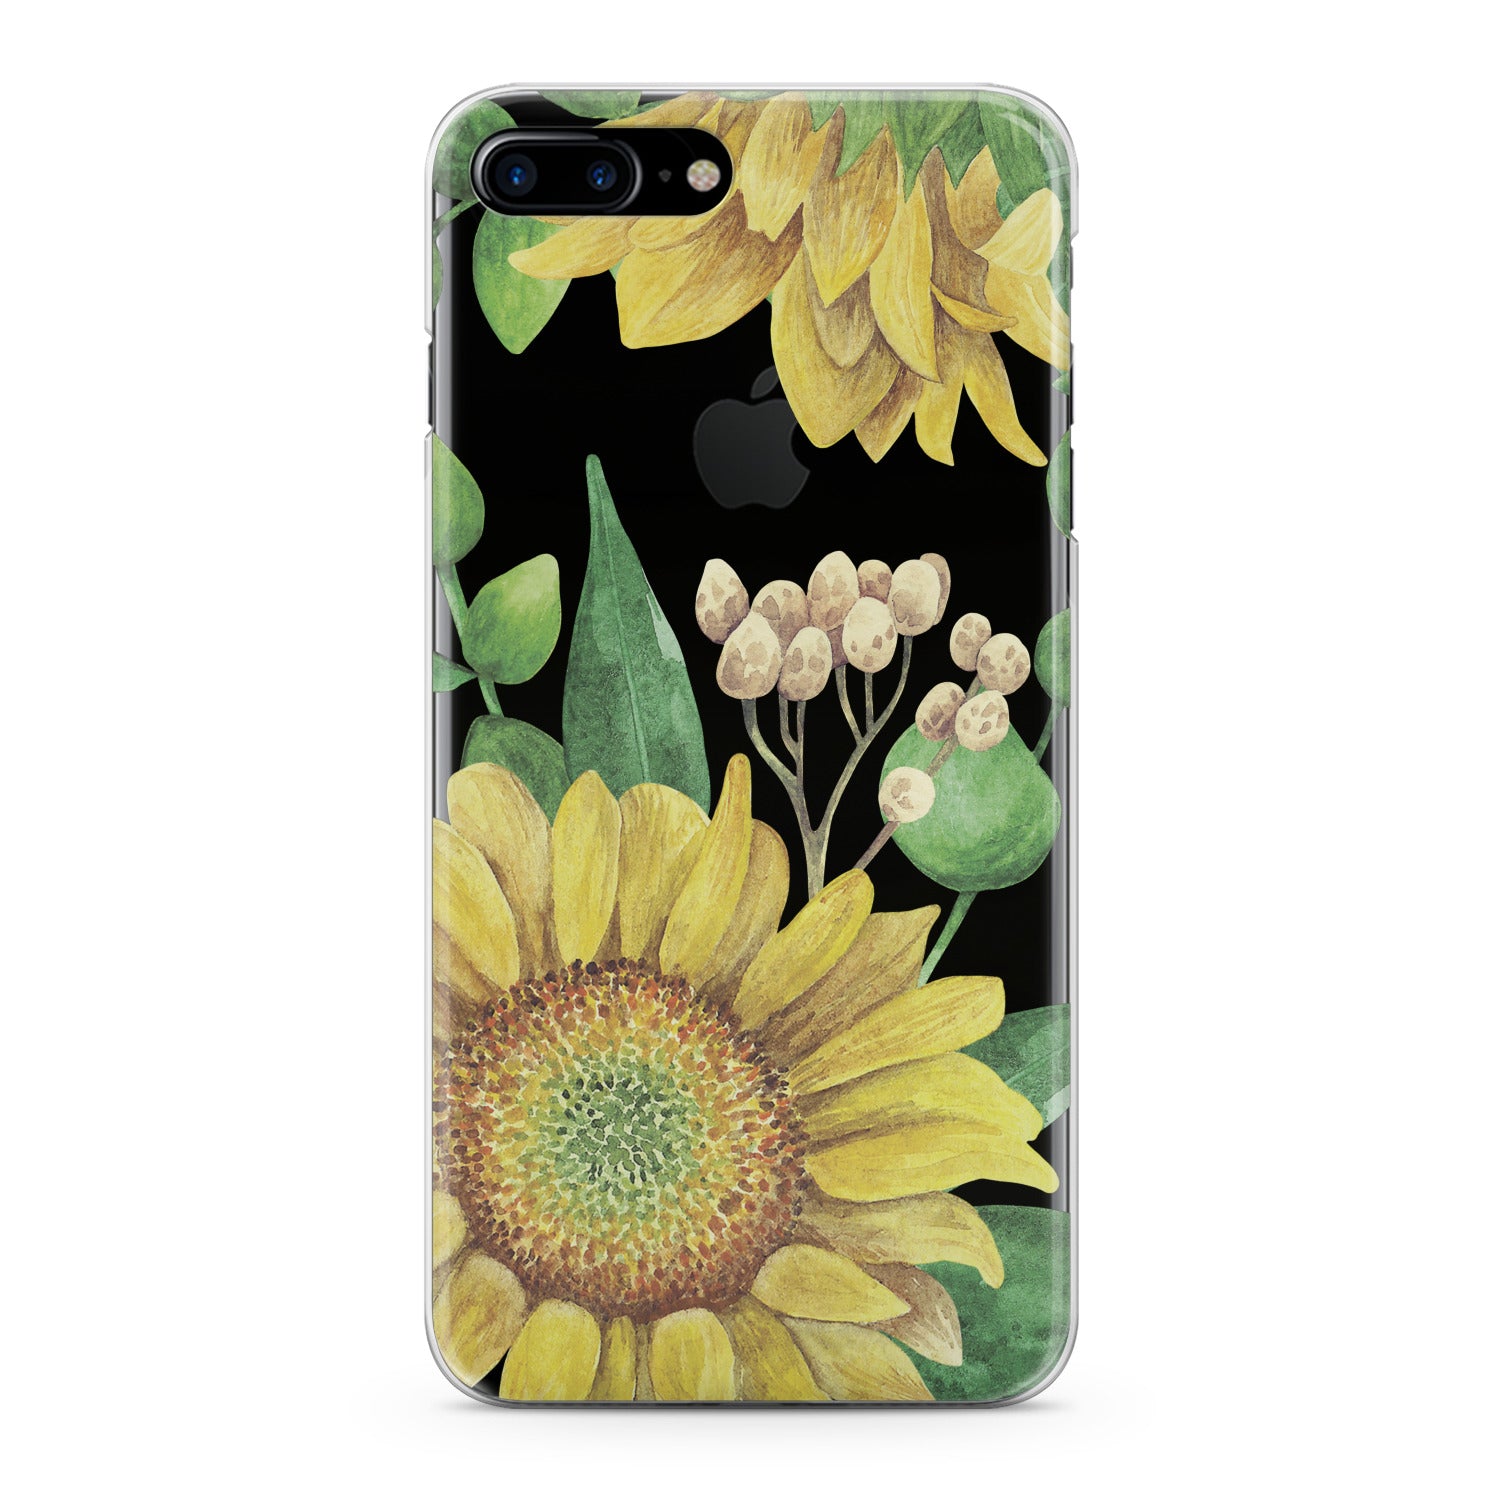 Lex Altern Watercolor Sunflower Phone Case for your iPhone & Android phone.